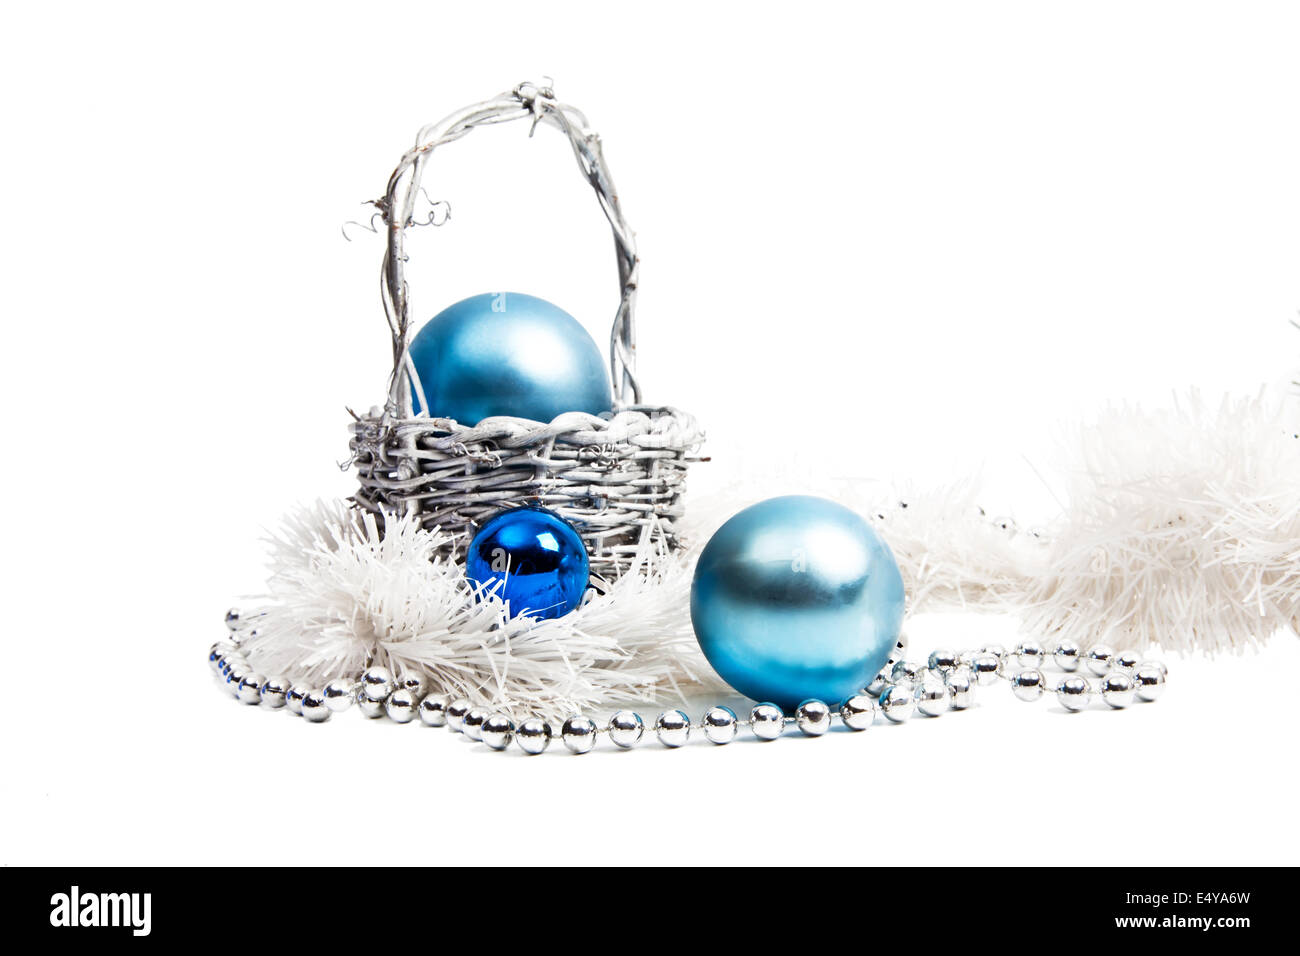 New Year composition in blue and silver Stock Photo